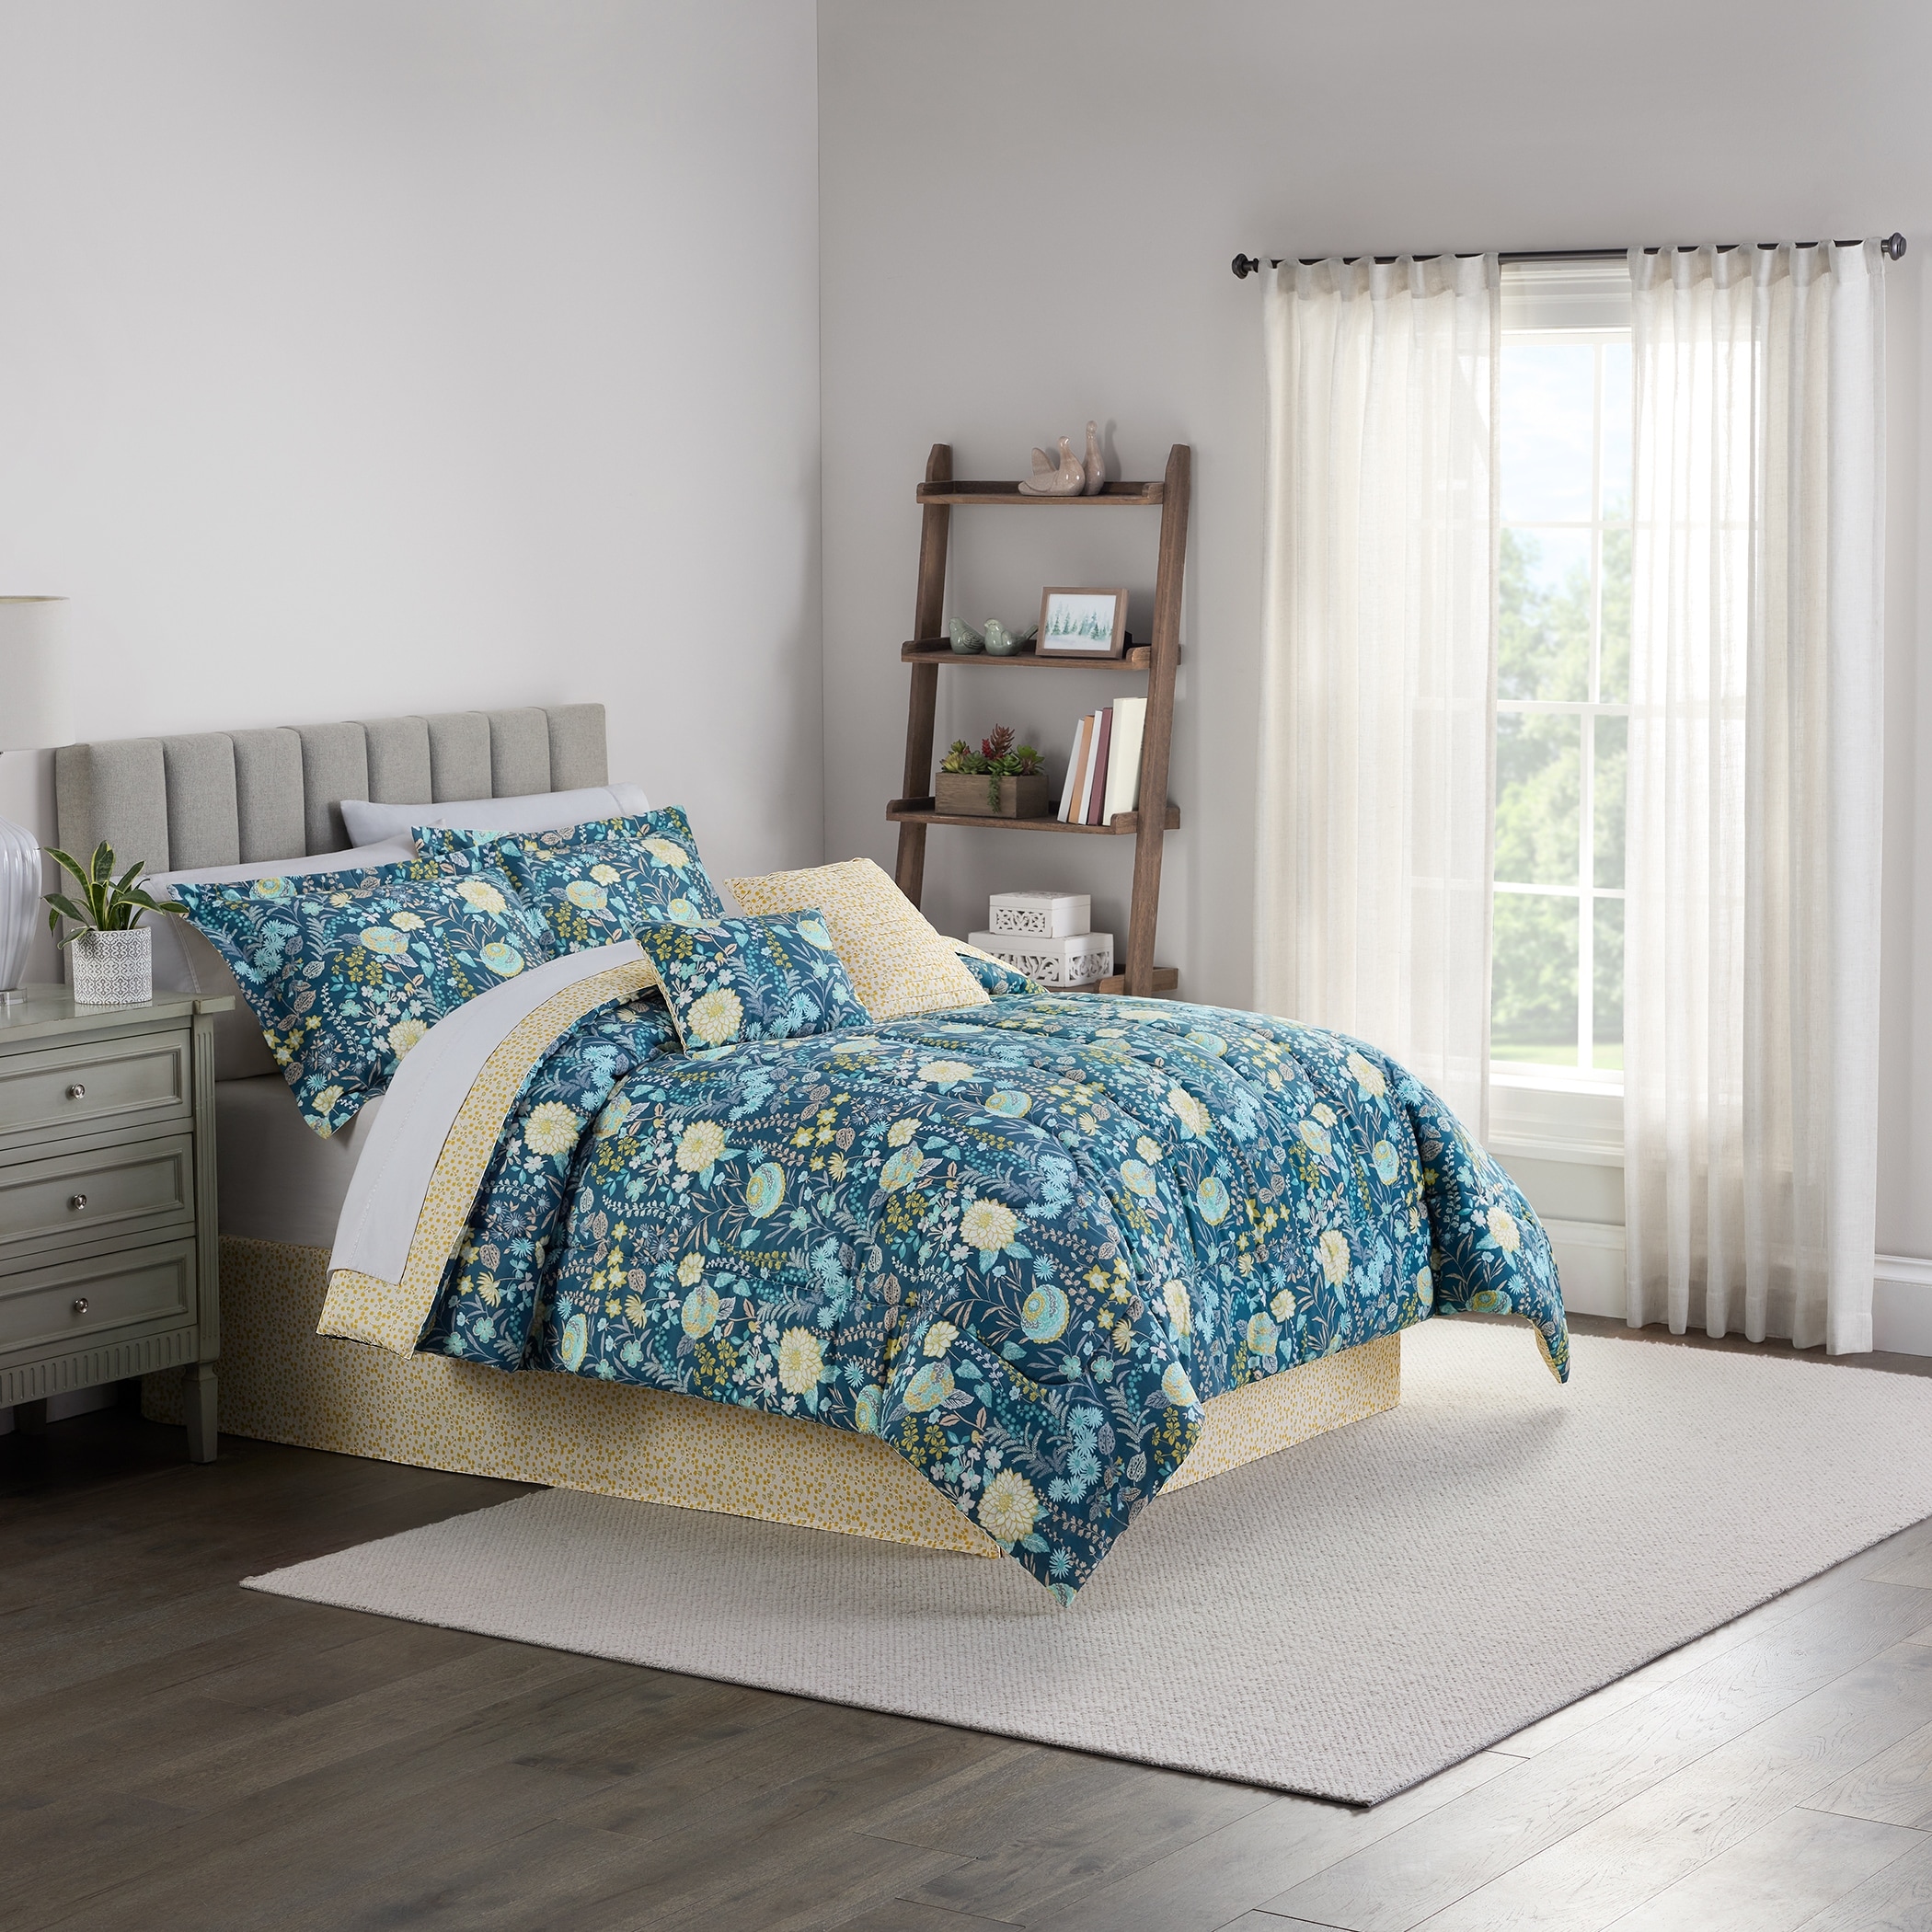 Traditions by WaverlyundefinedClassic Fiona Floralundefined6 Piece Pattern Bedding  Set - Bed Bath & Beyond - 39006224